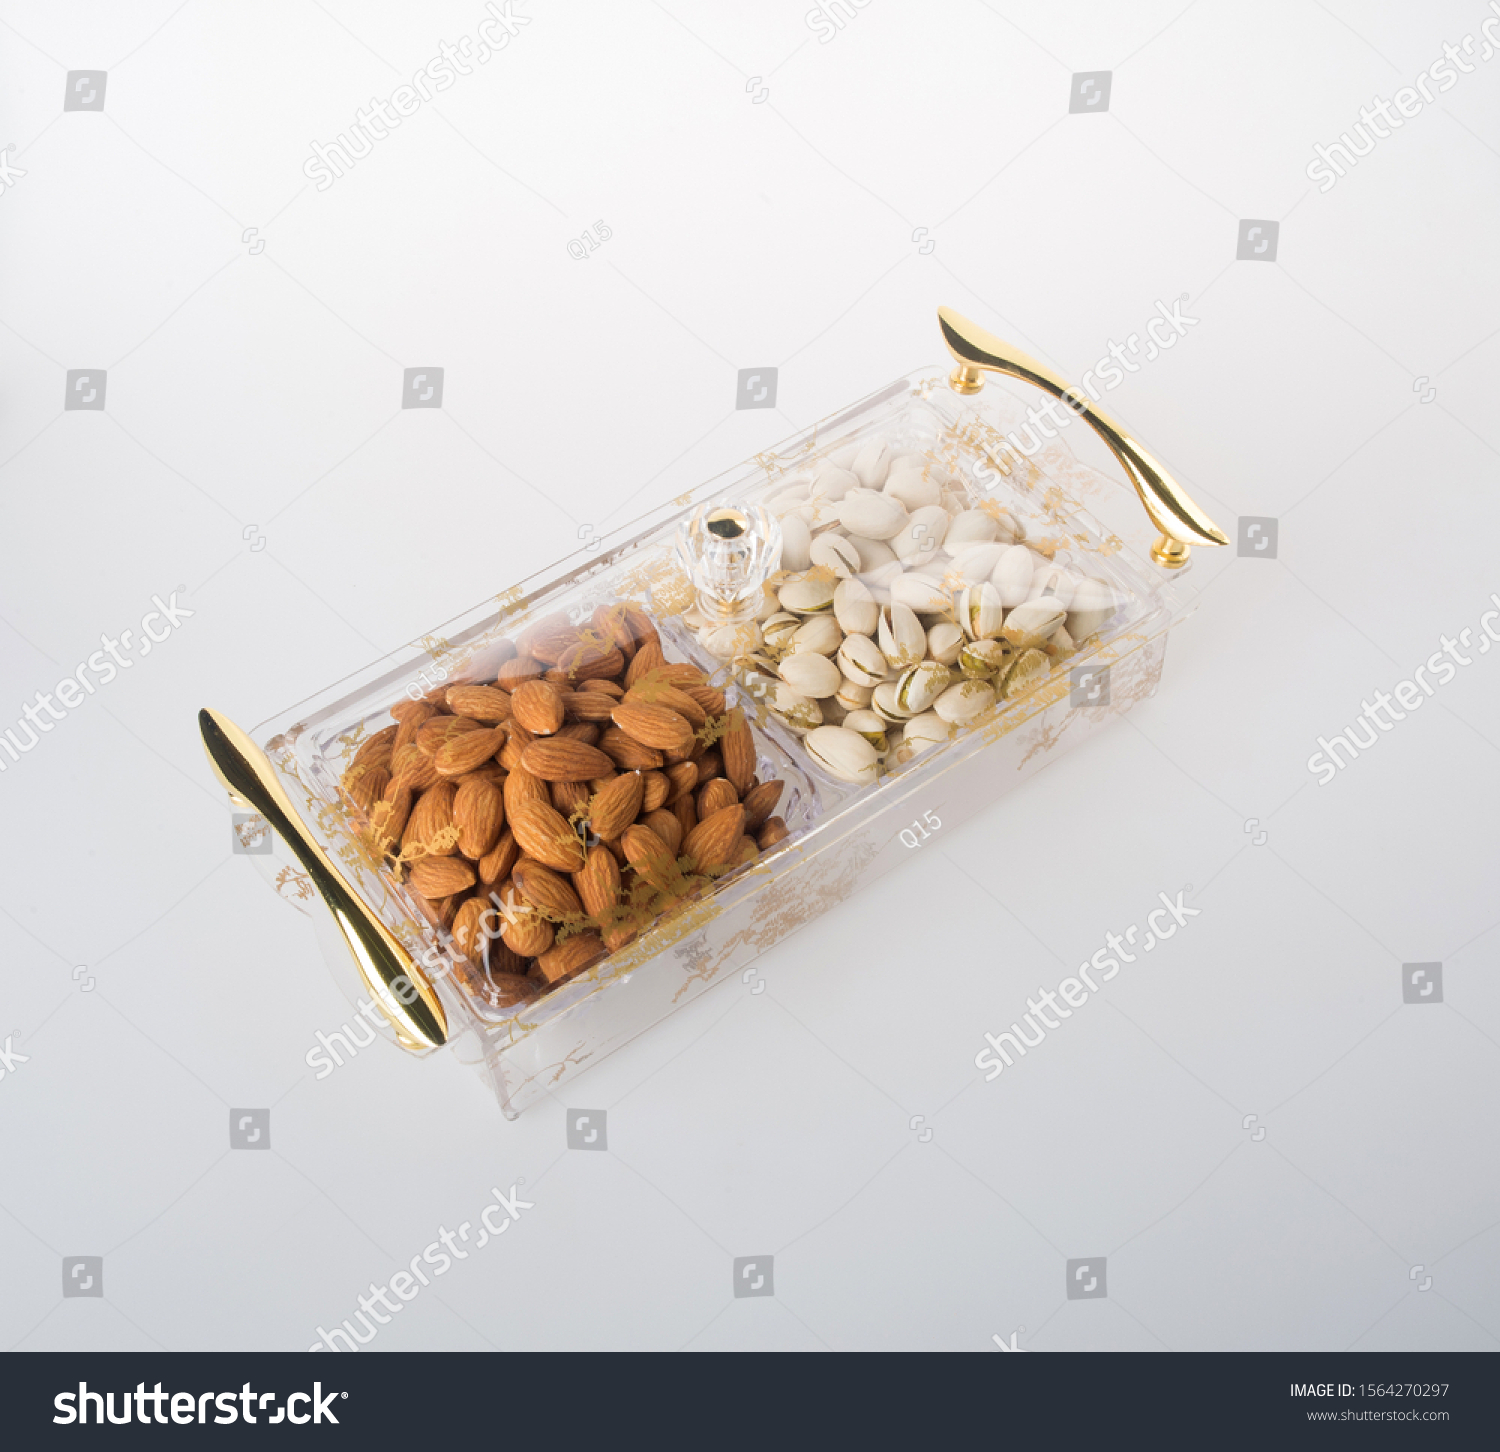 nuts or Almond nuts and Pistachio nuts on a background new #1564270297